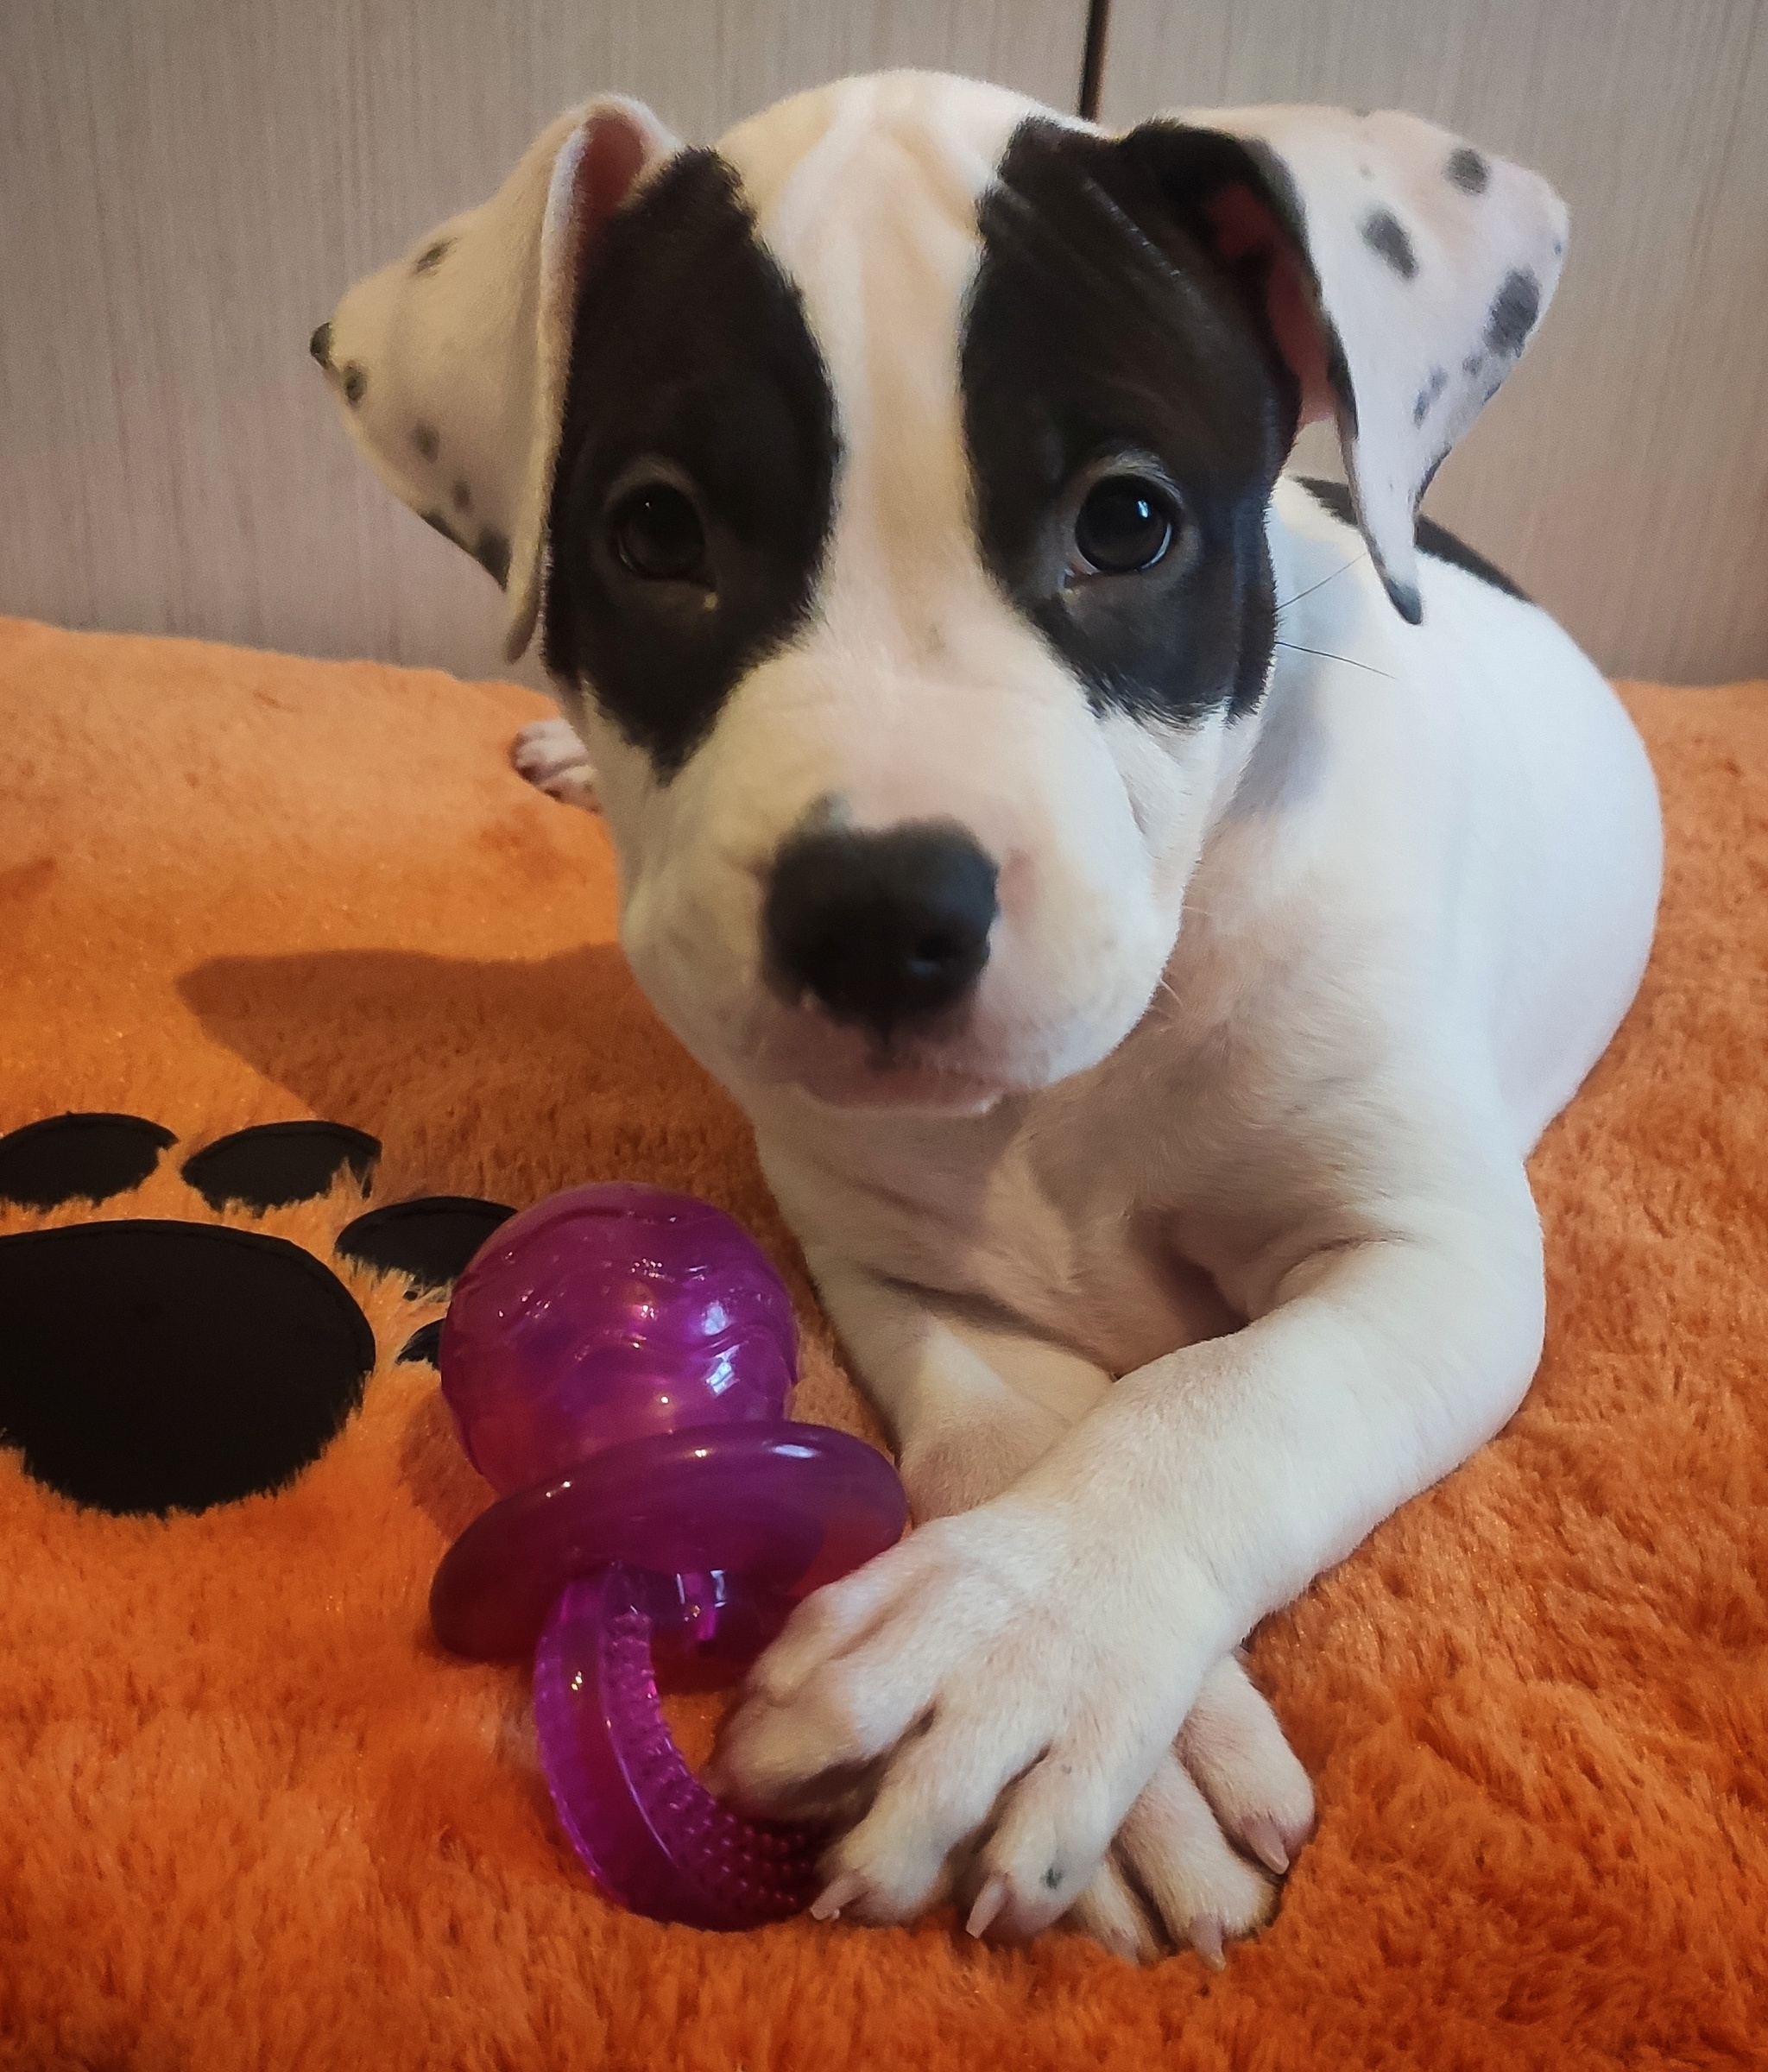 New family member - My, Dog, Amstaff, Photo on sneaker